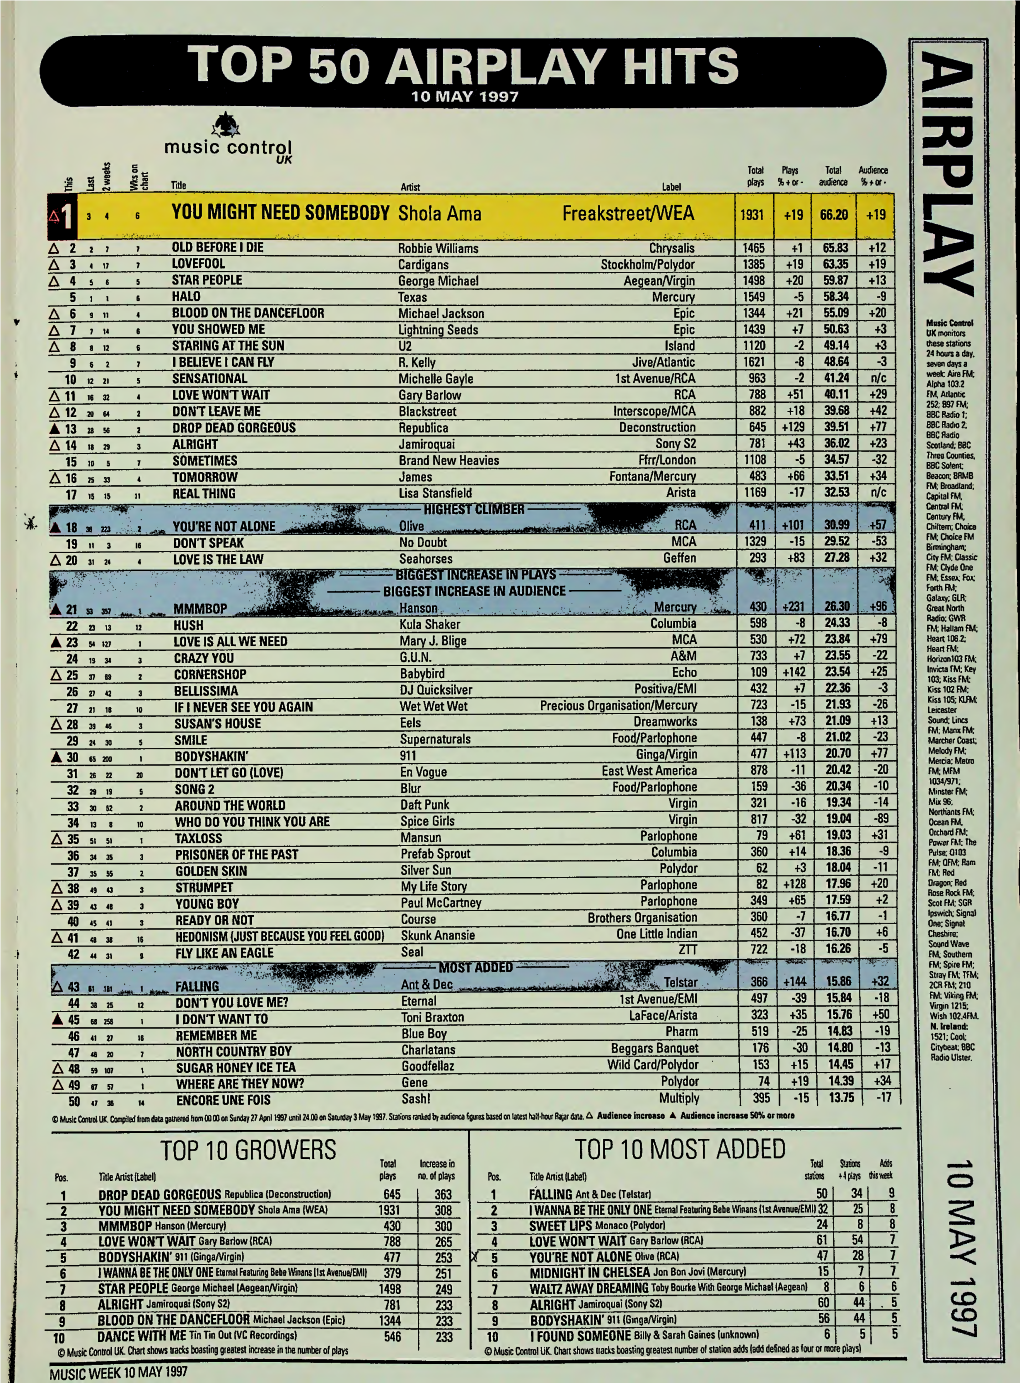 TOP 50 AIRPLAY HITS L 10 MAY 1997 a Music Control 1 Il II Nu